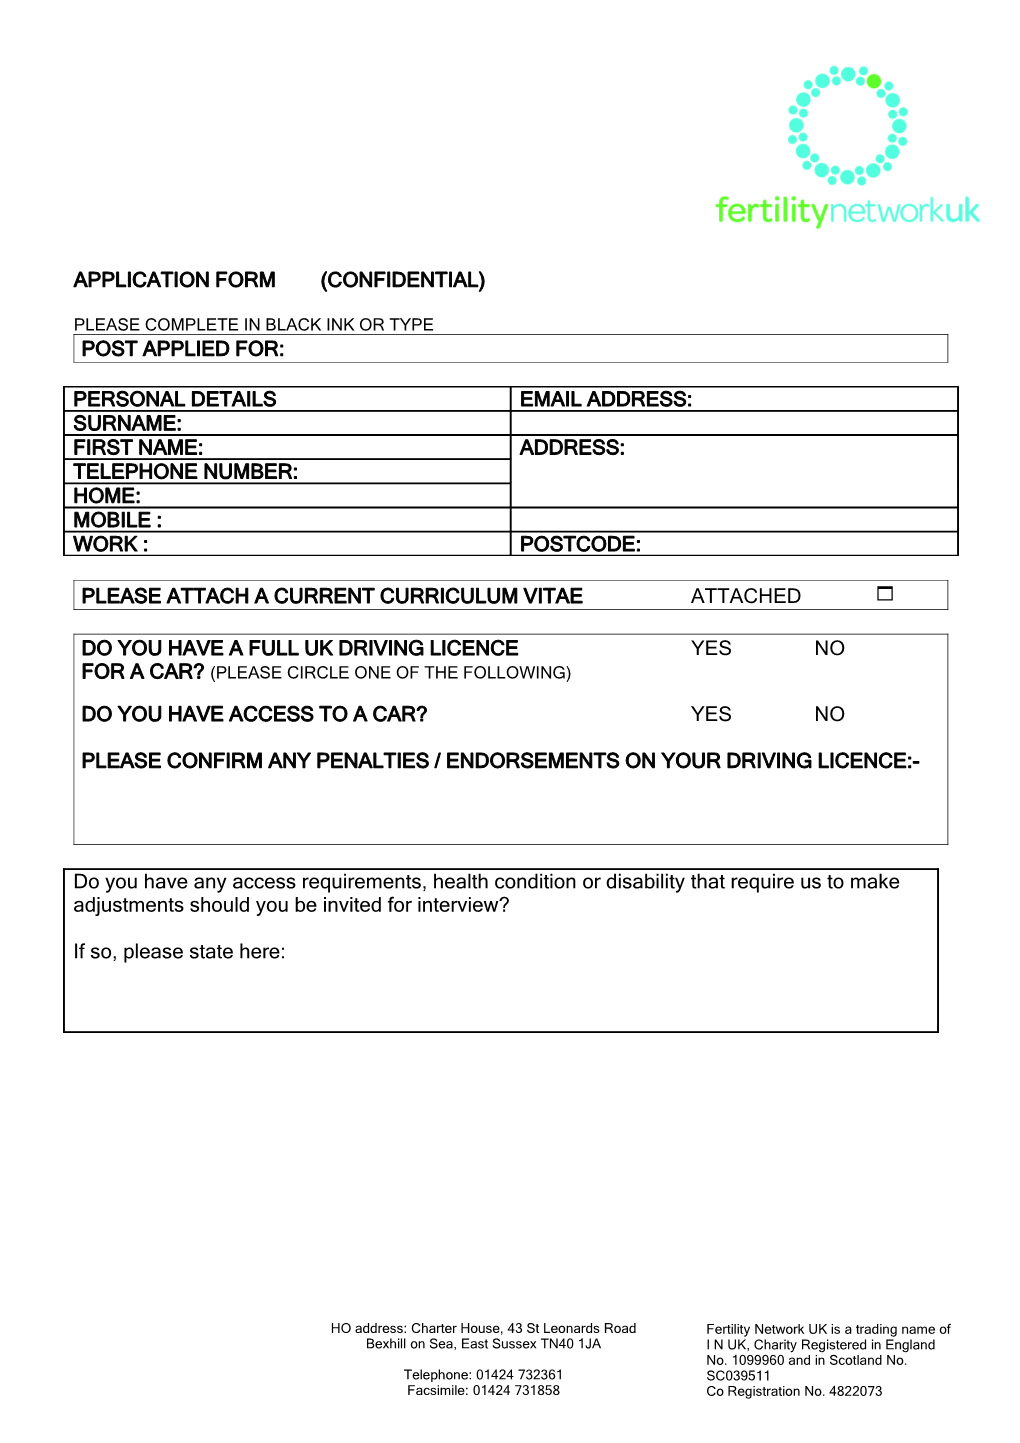 Application Form (Confidential) s2